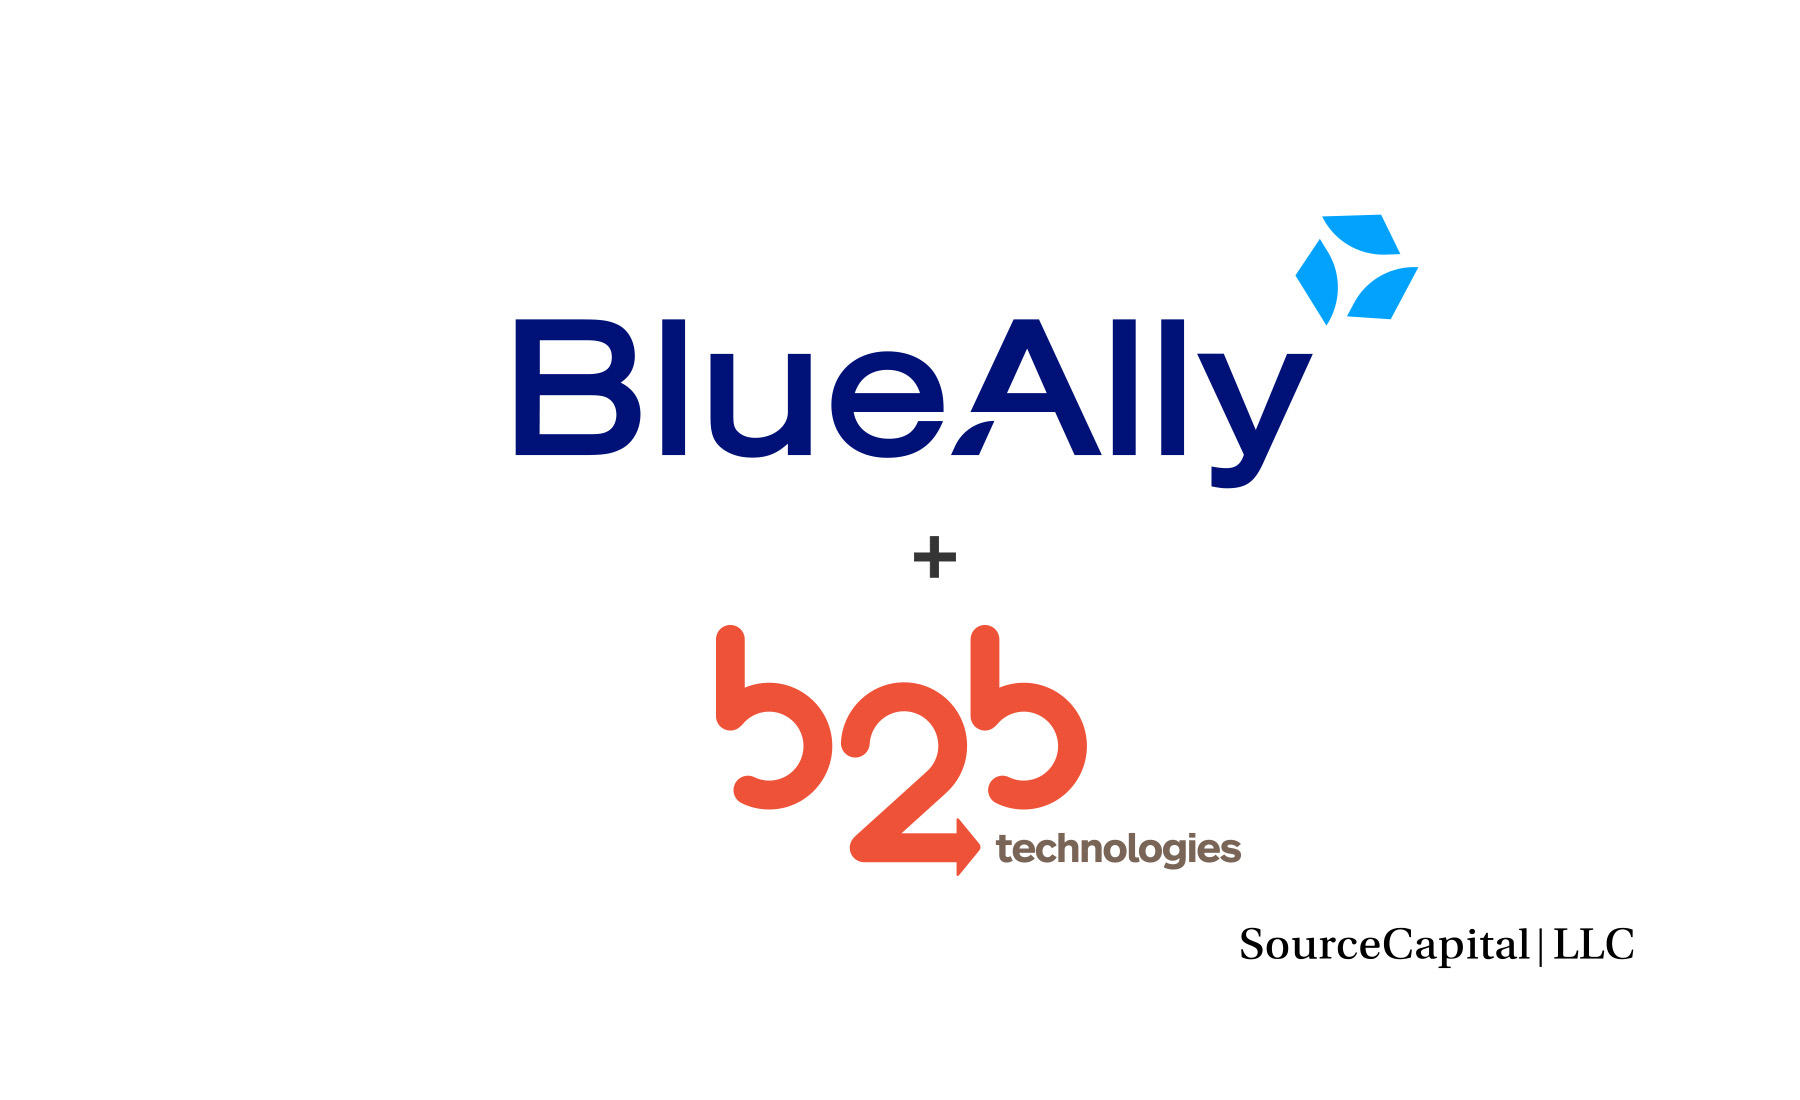 BlueAlly Acquires B2B Technologies